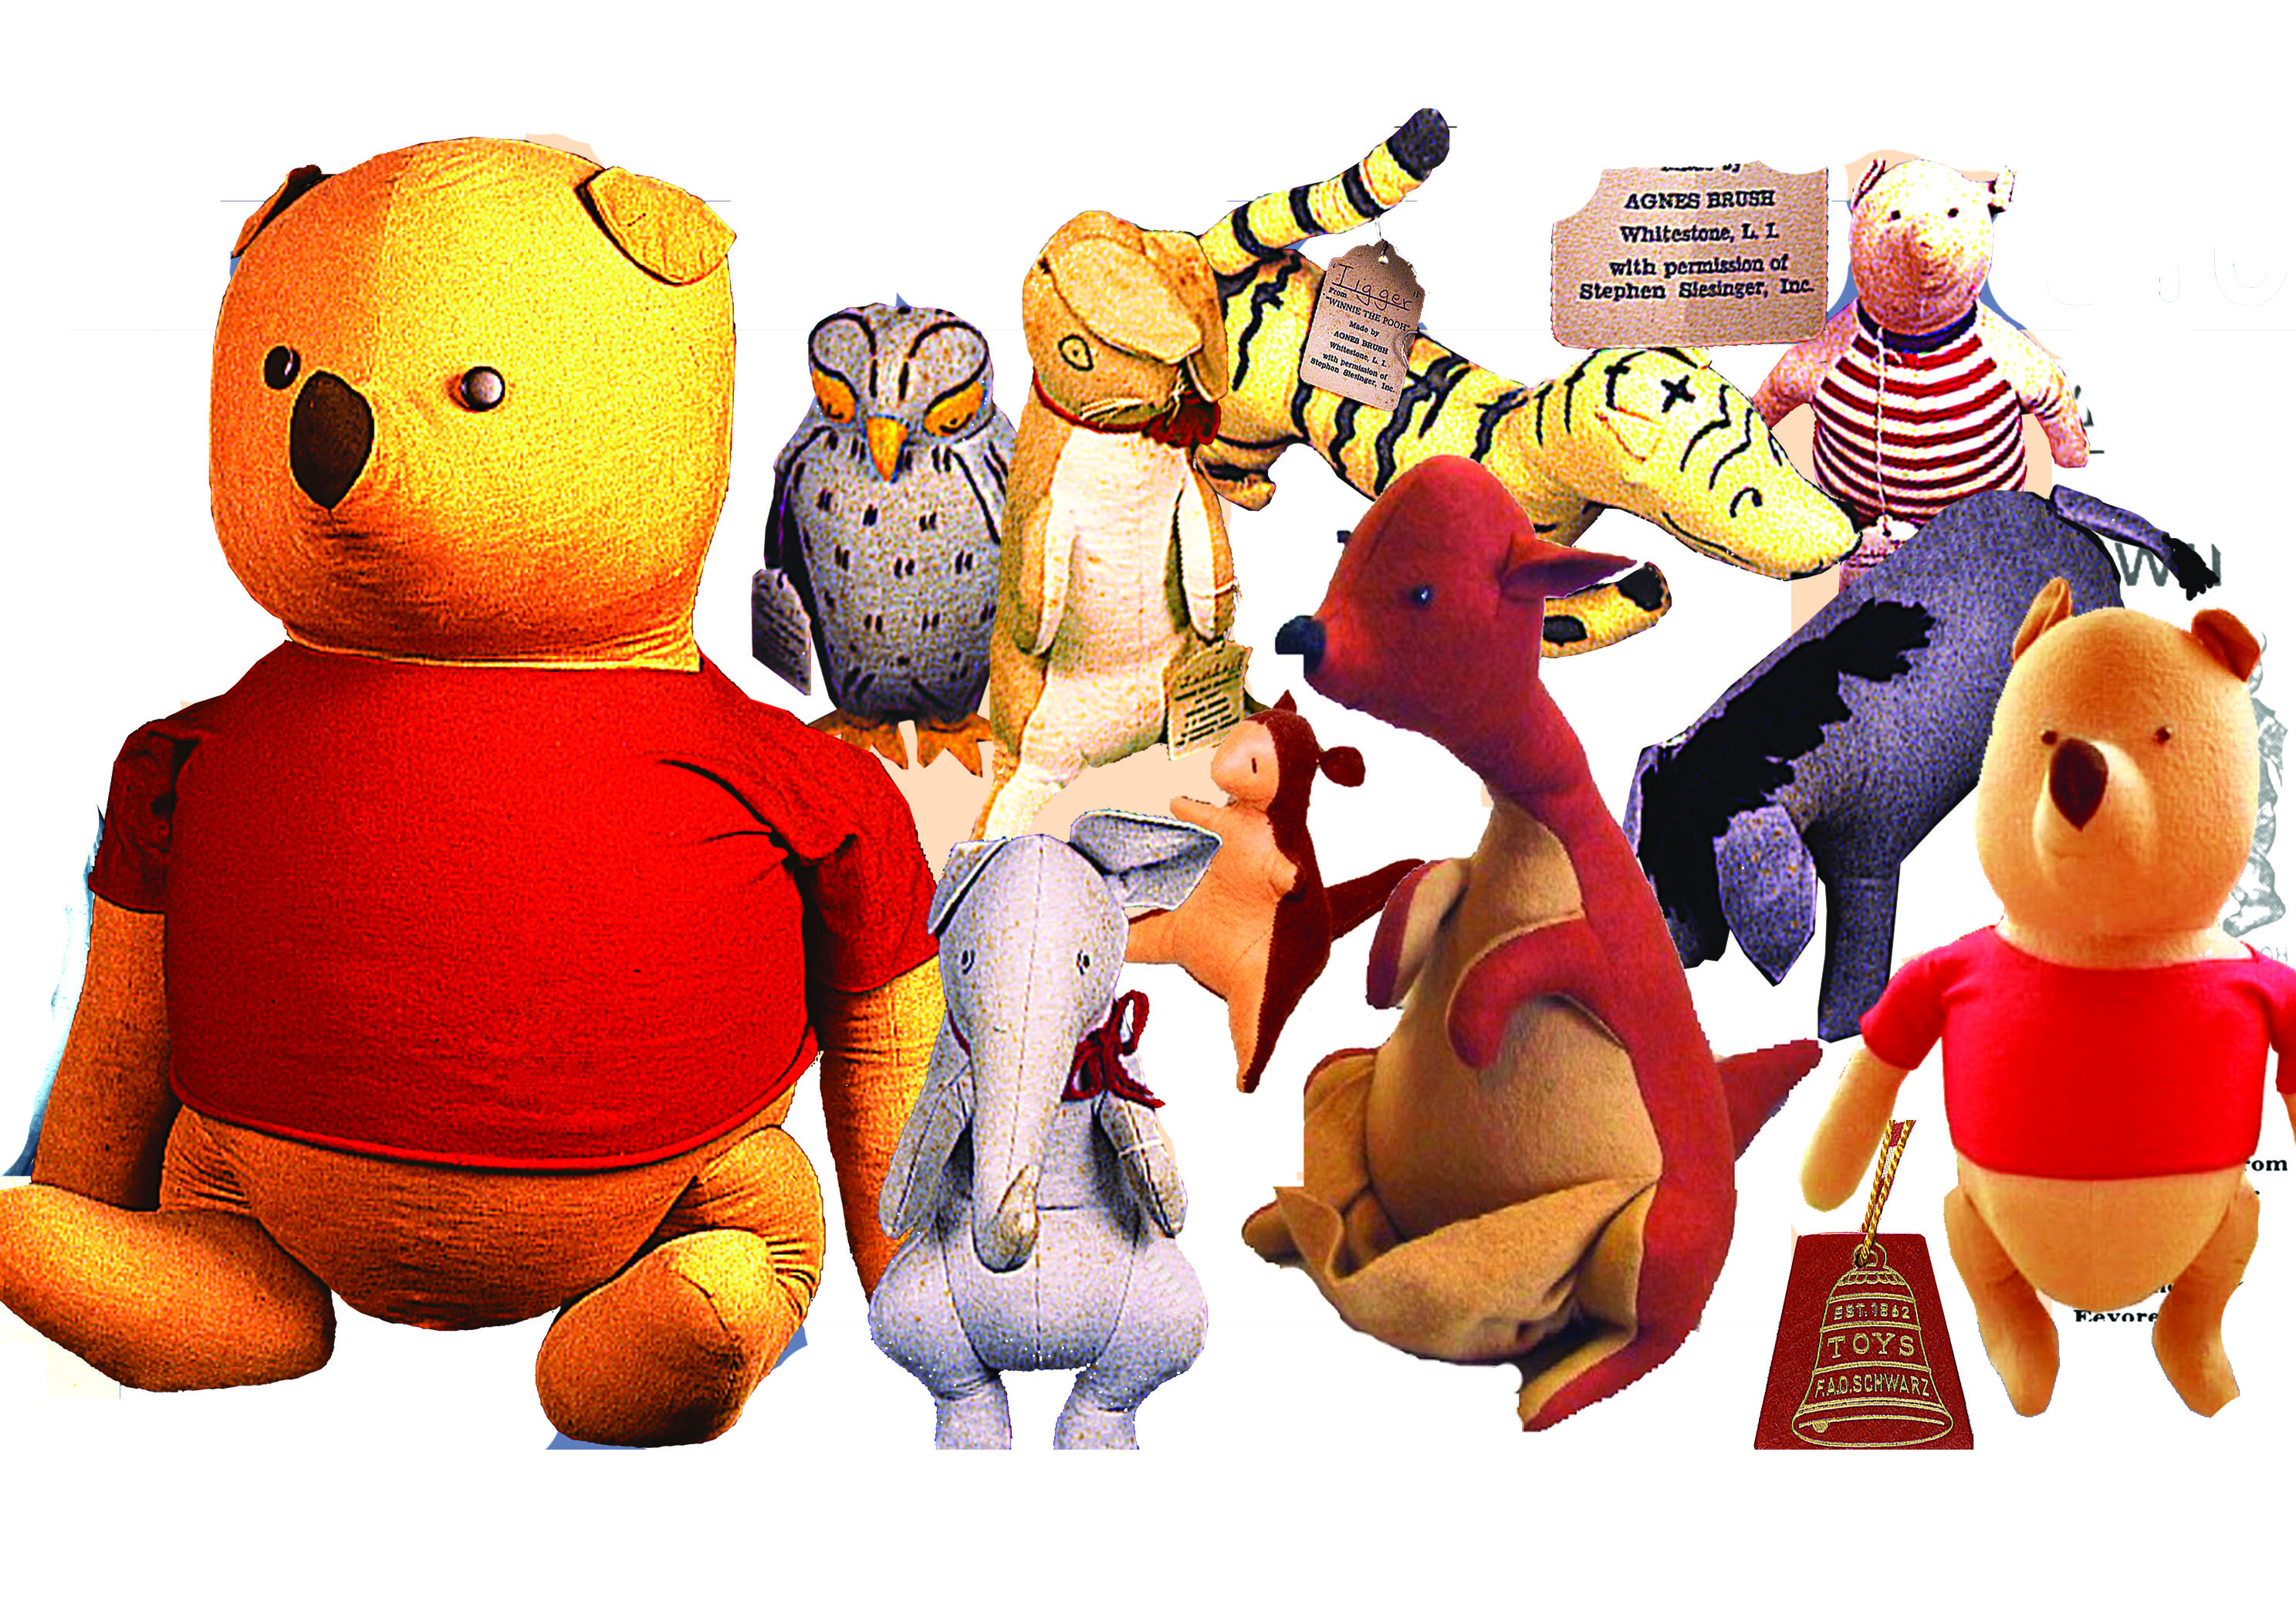 File:POOH AGNES BRUSH STUFFED TOYS FROM THE 1940s.jpg - Wikipedia ...